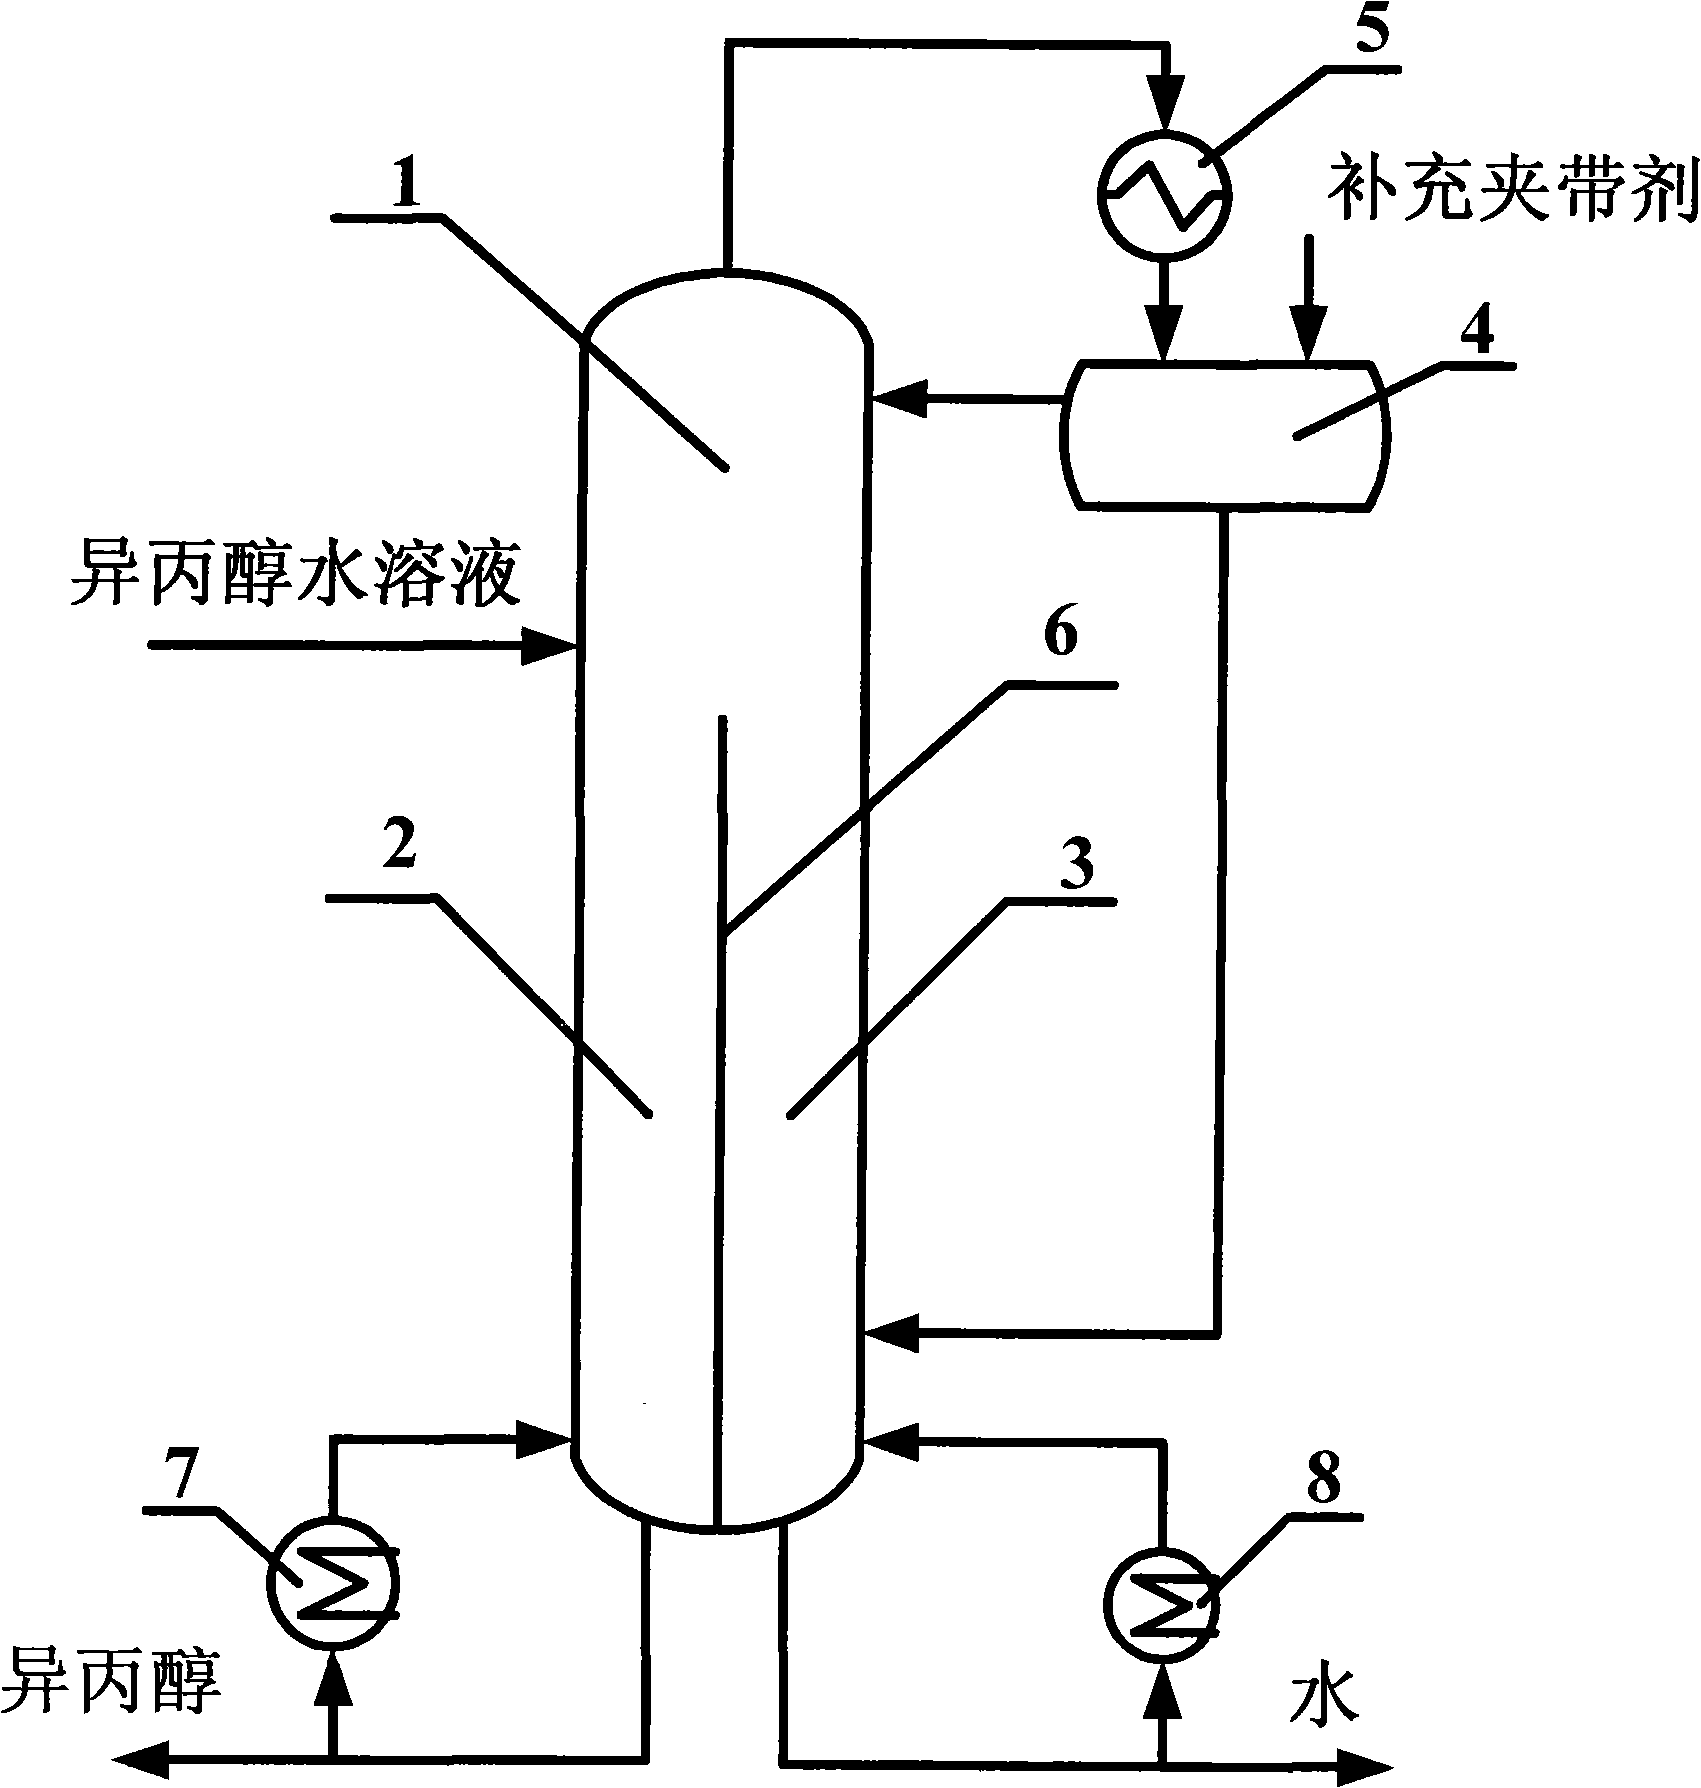 Technological process and device for separating isopropanol water solution